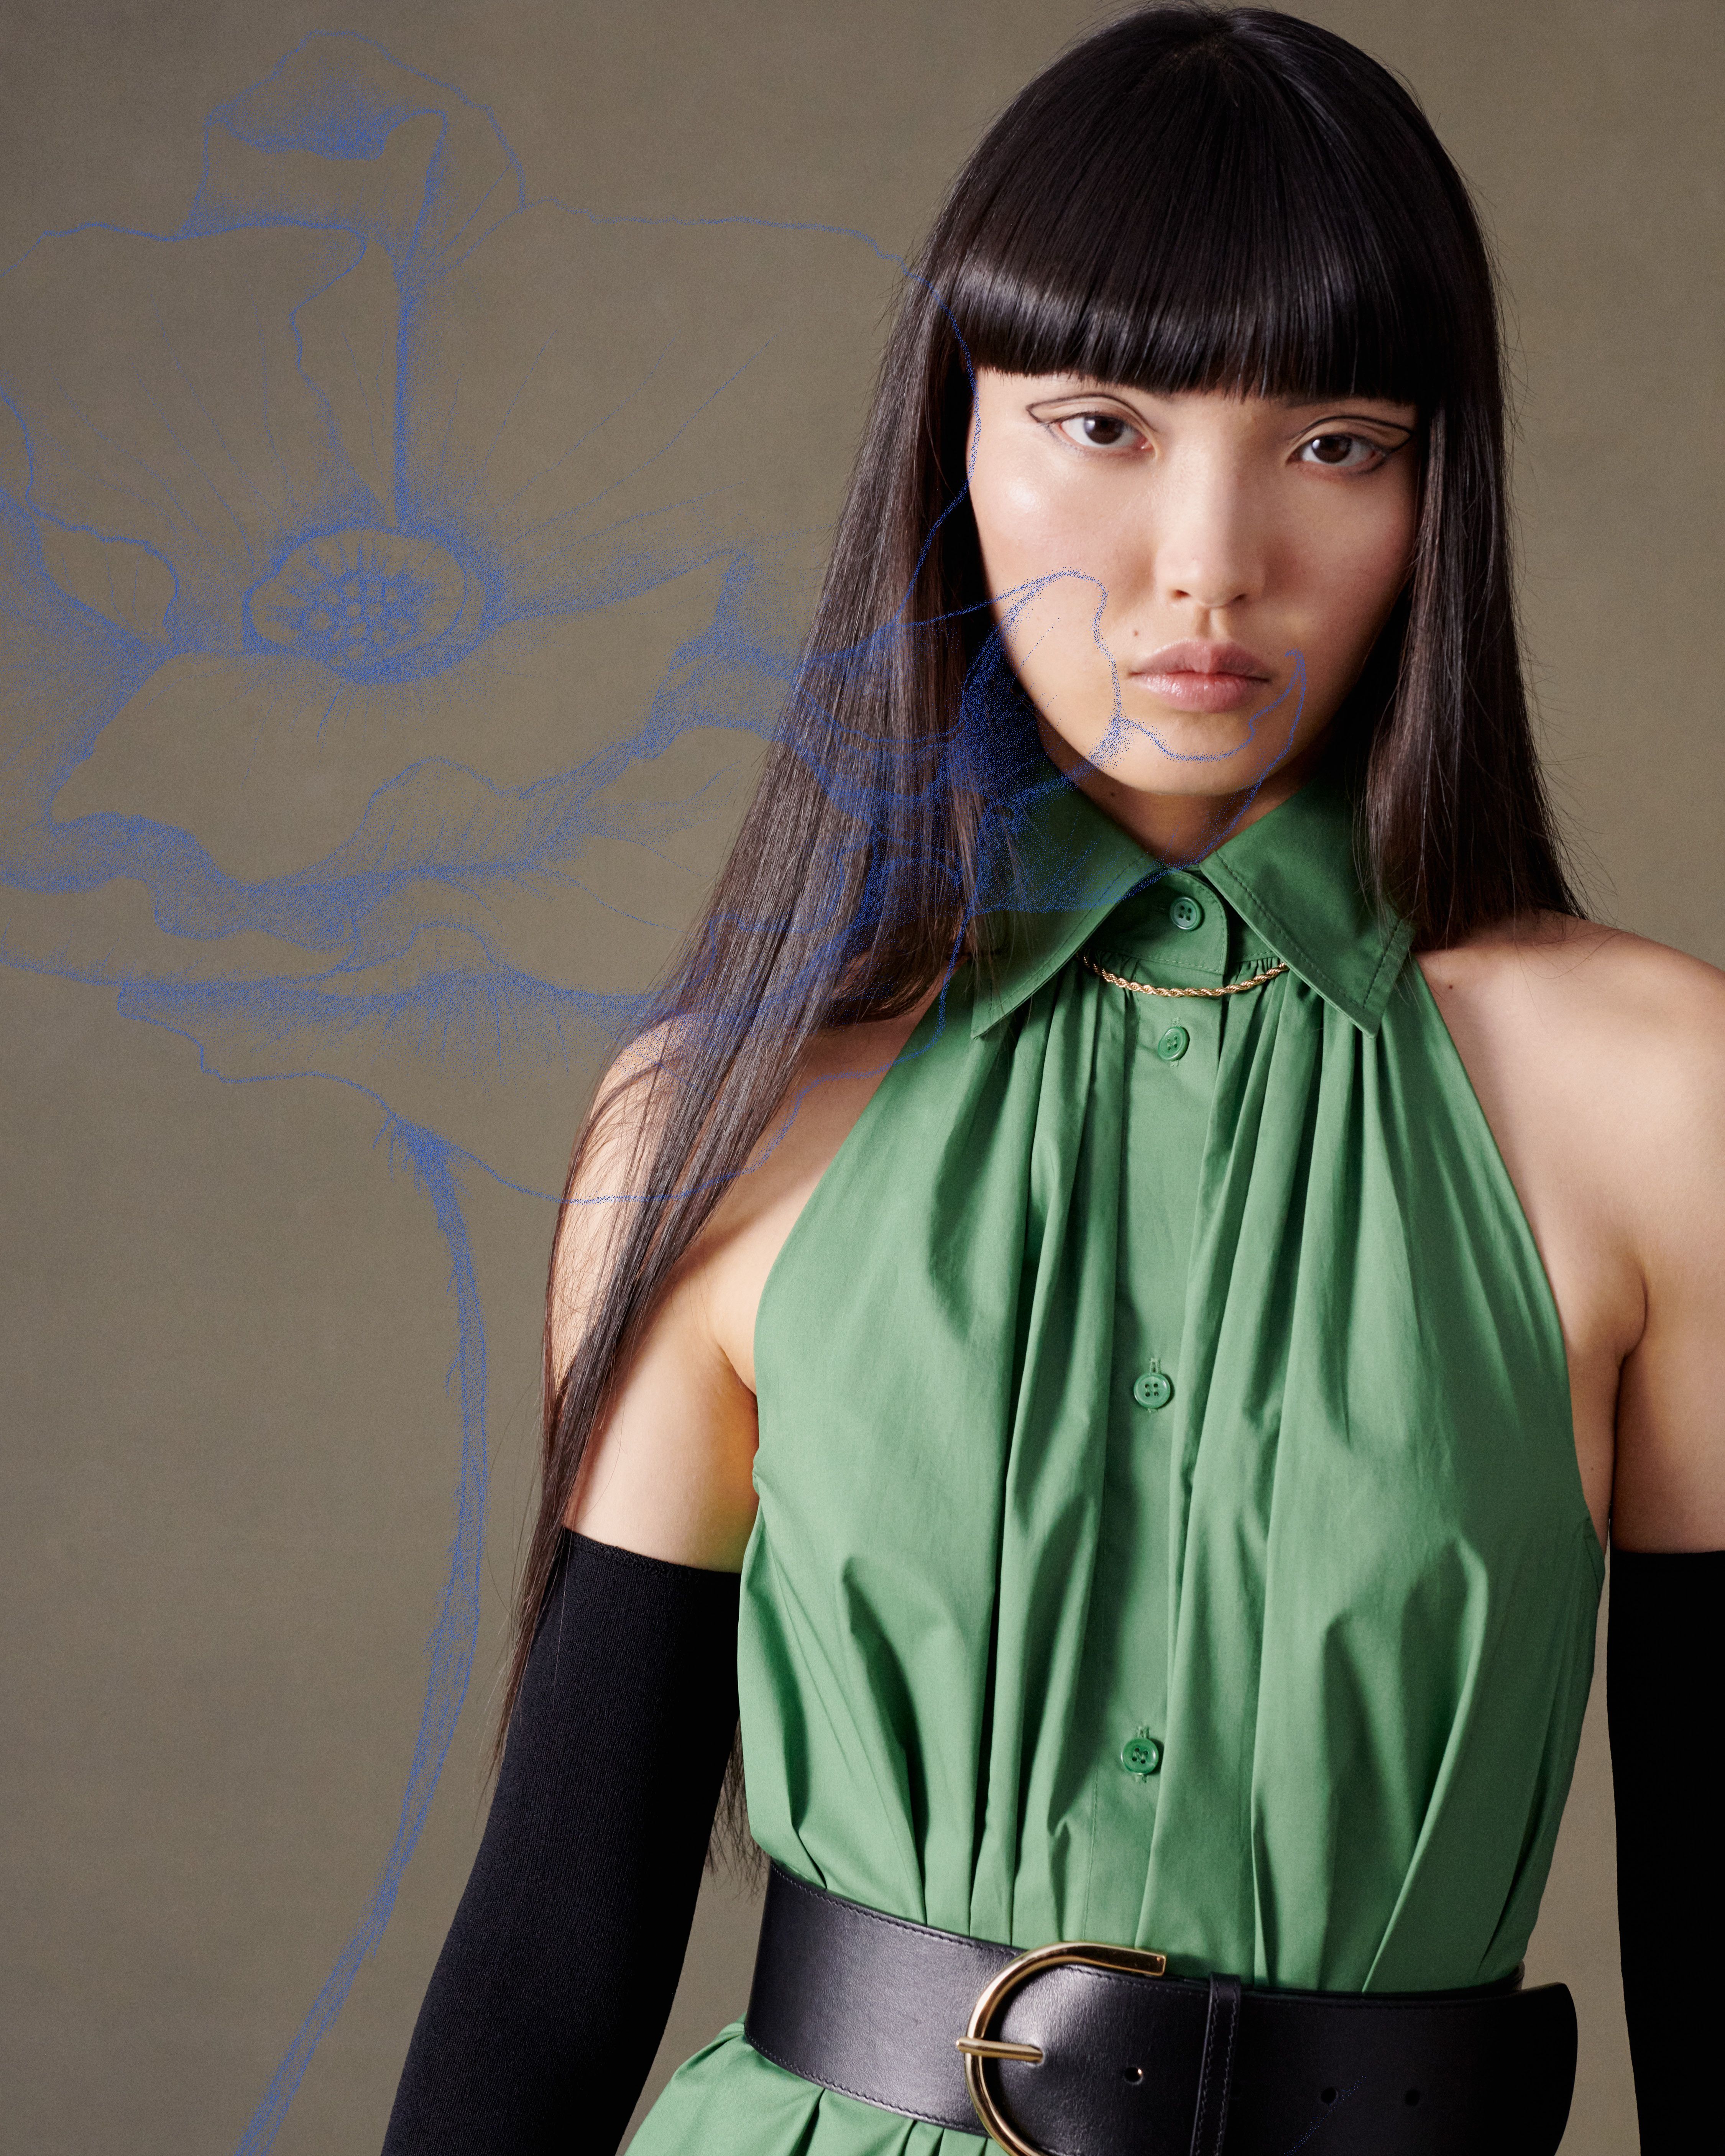 Model gazing at camera wearing a green dress with black gloves and belt with a blue poppy illustration overlaid on top